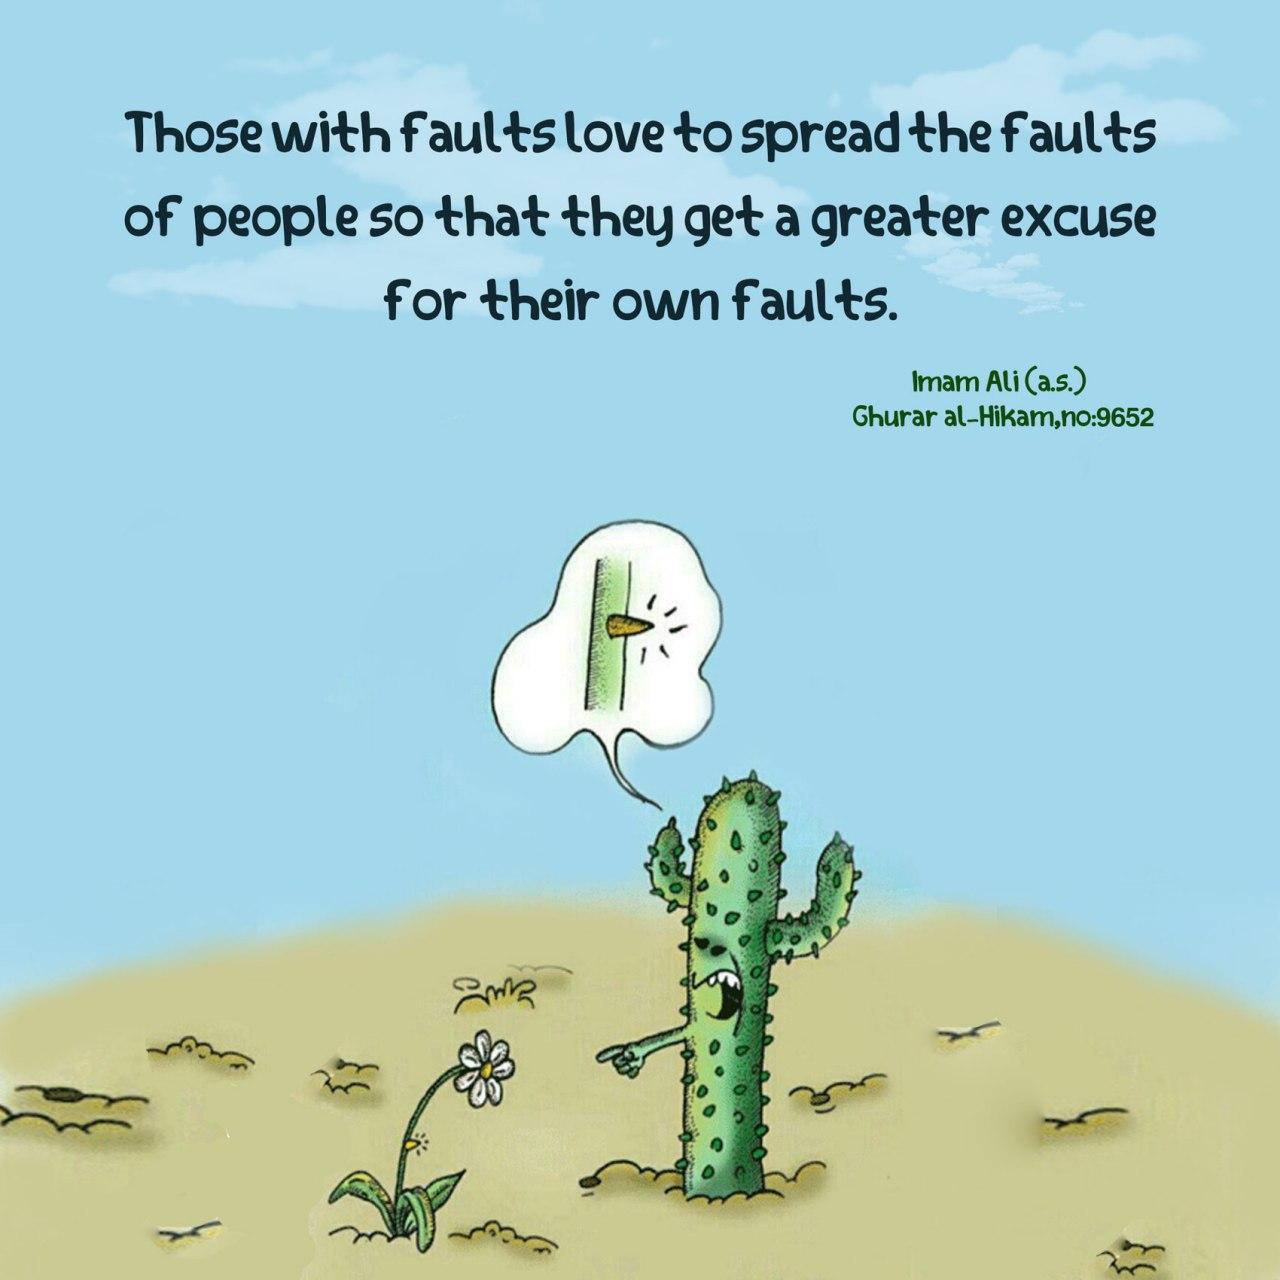 Those with faults love to spread the faults of people